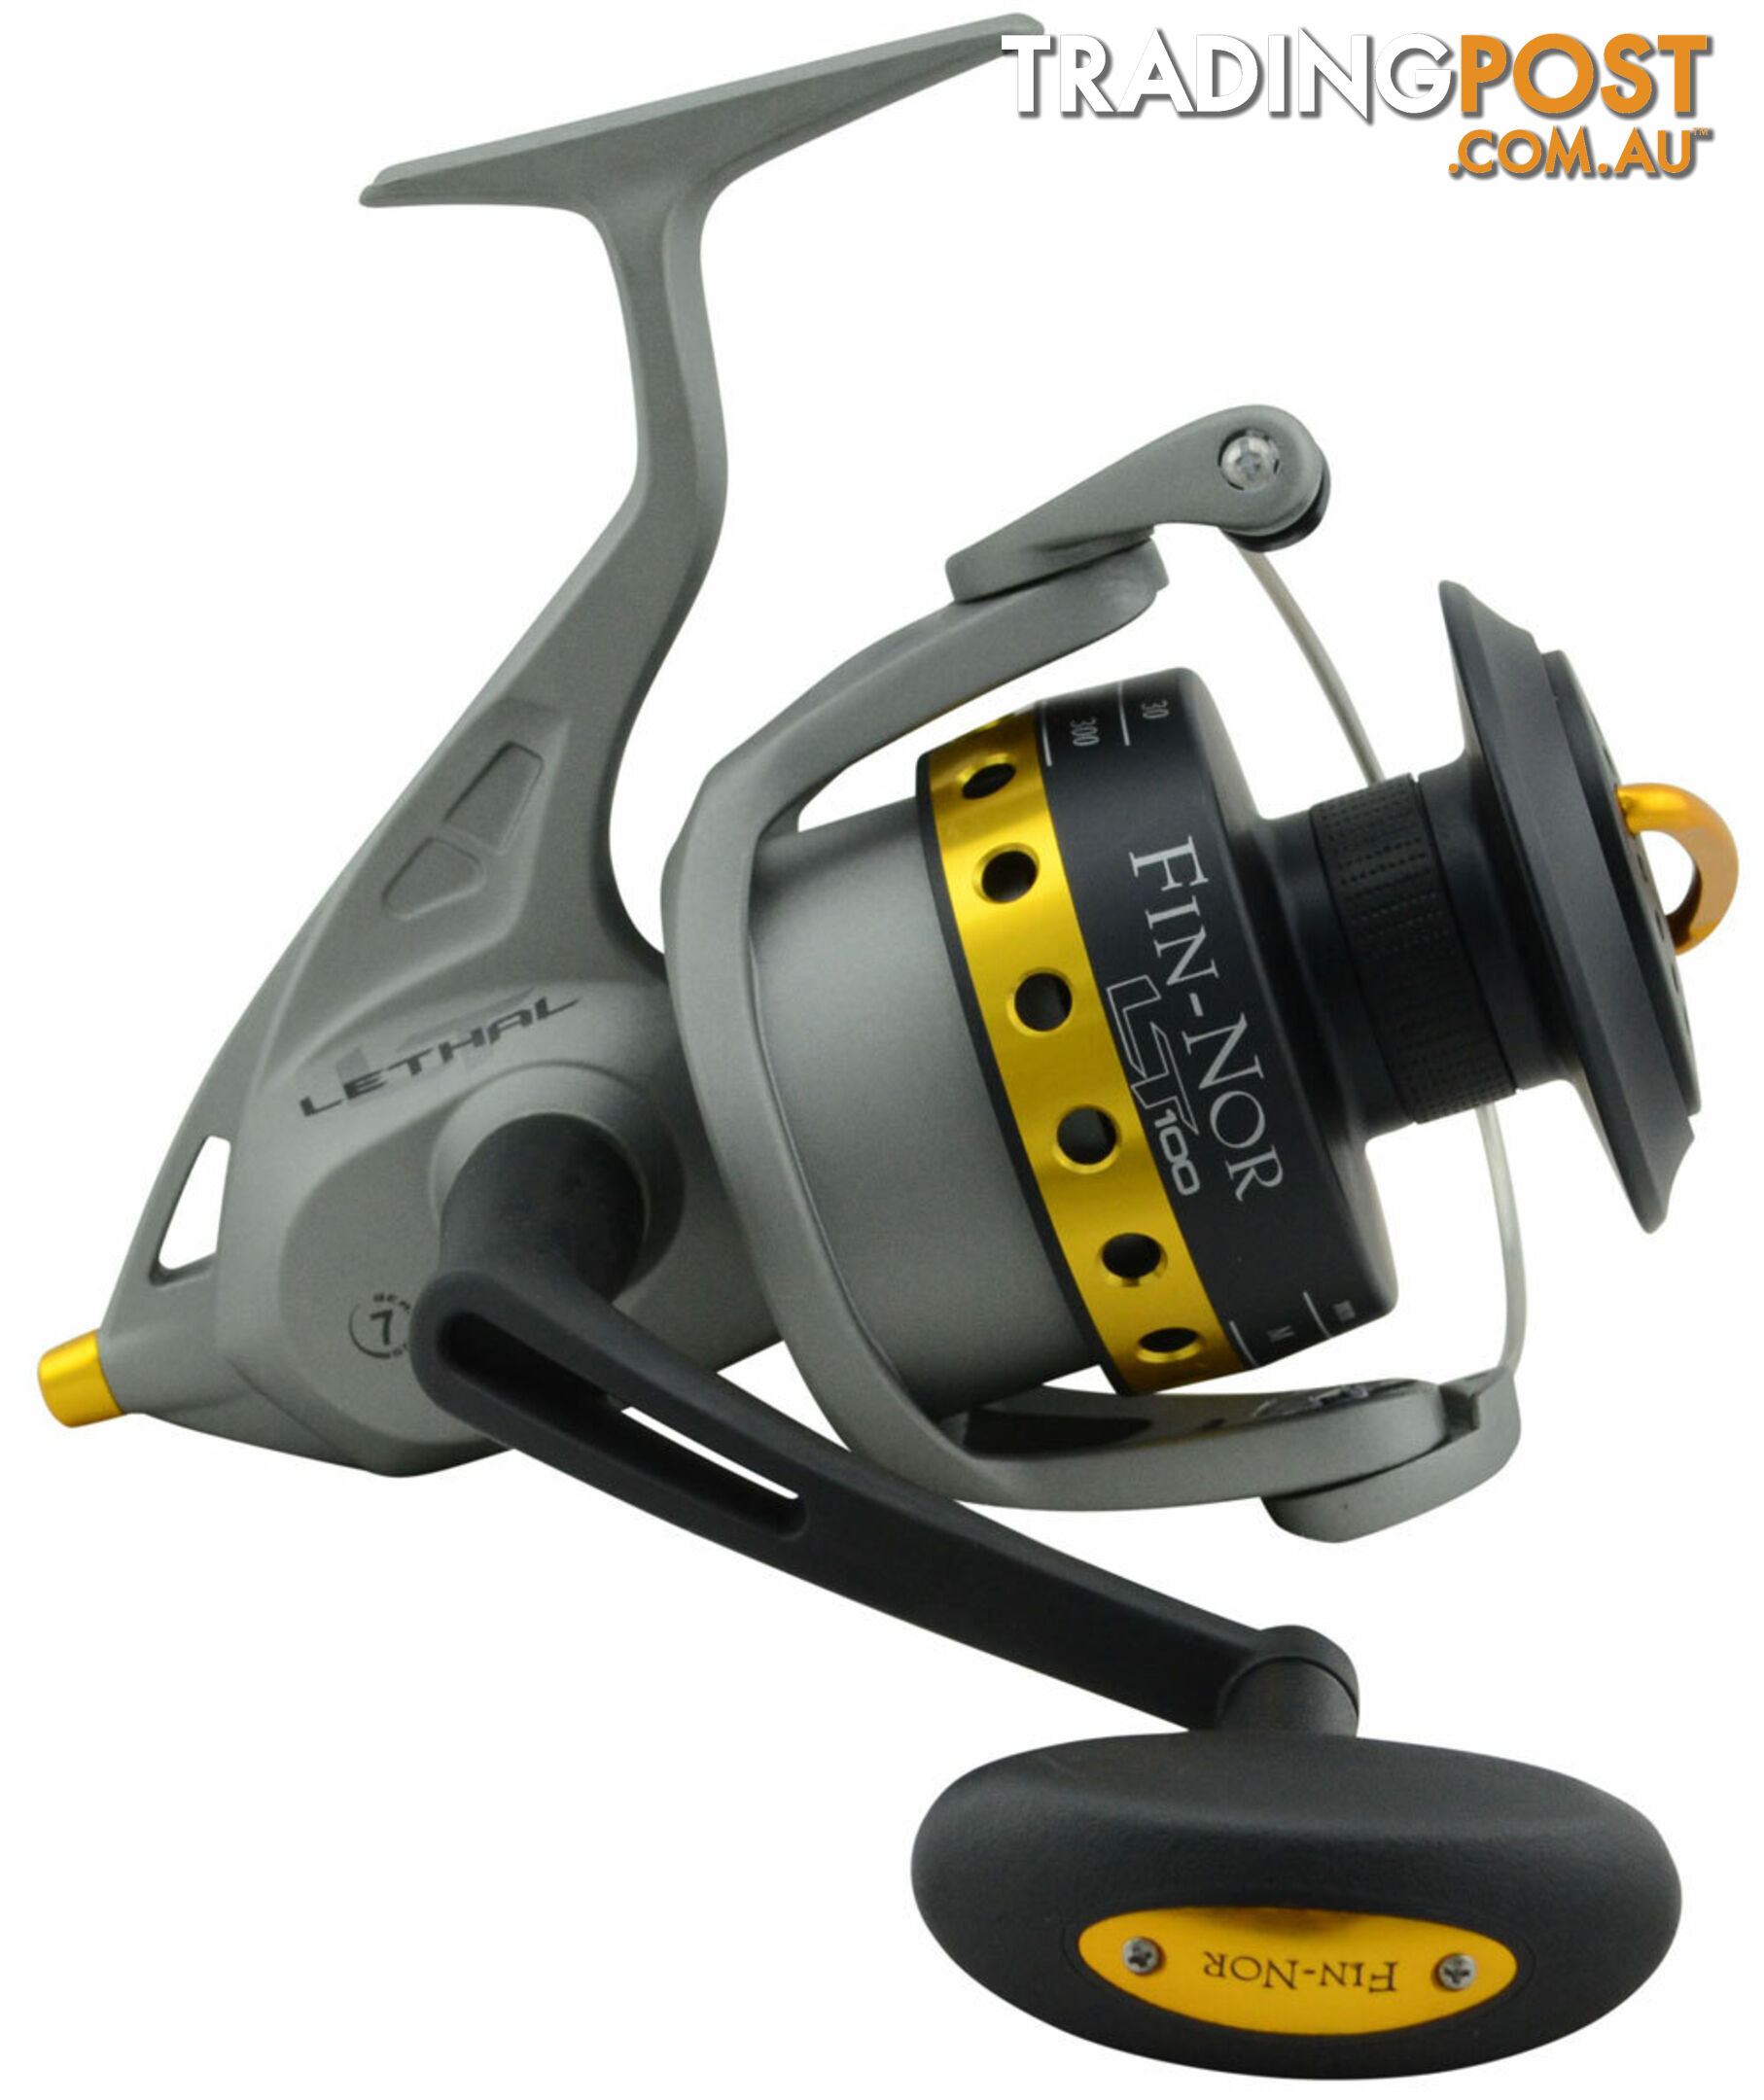 Fin-Nor Lethal Fishing Reel  - Lethal 100 - 1531261 - Fin-Nor - 032784612827